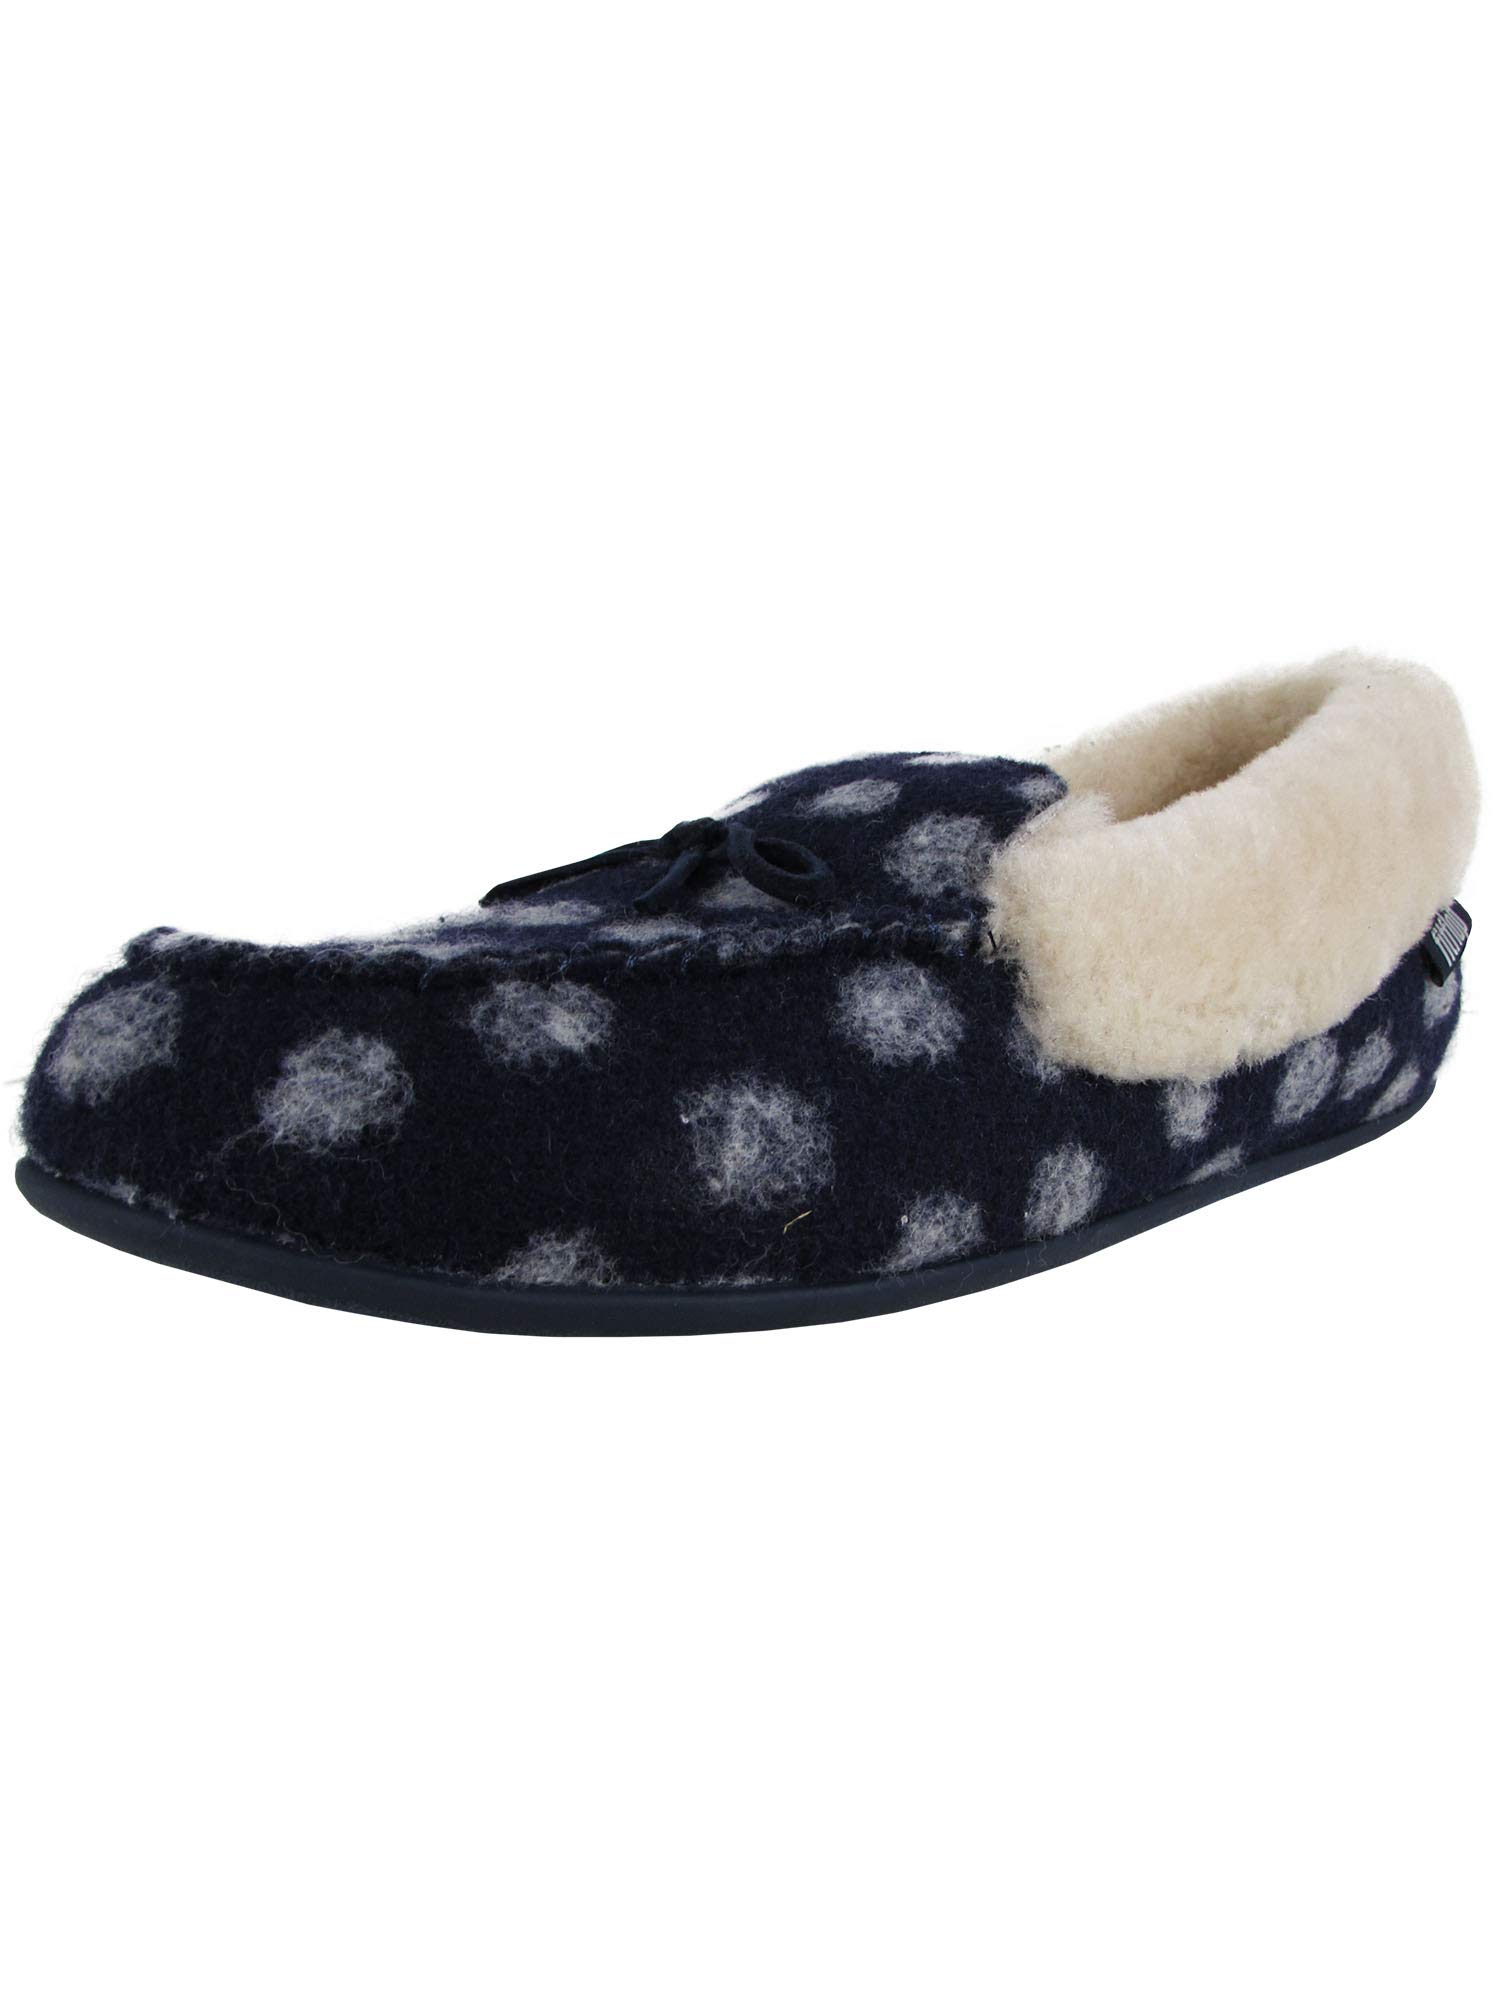 FitFlop Womens Clara Moccasin Dots Slipper Shoes